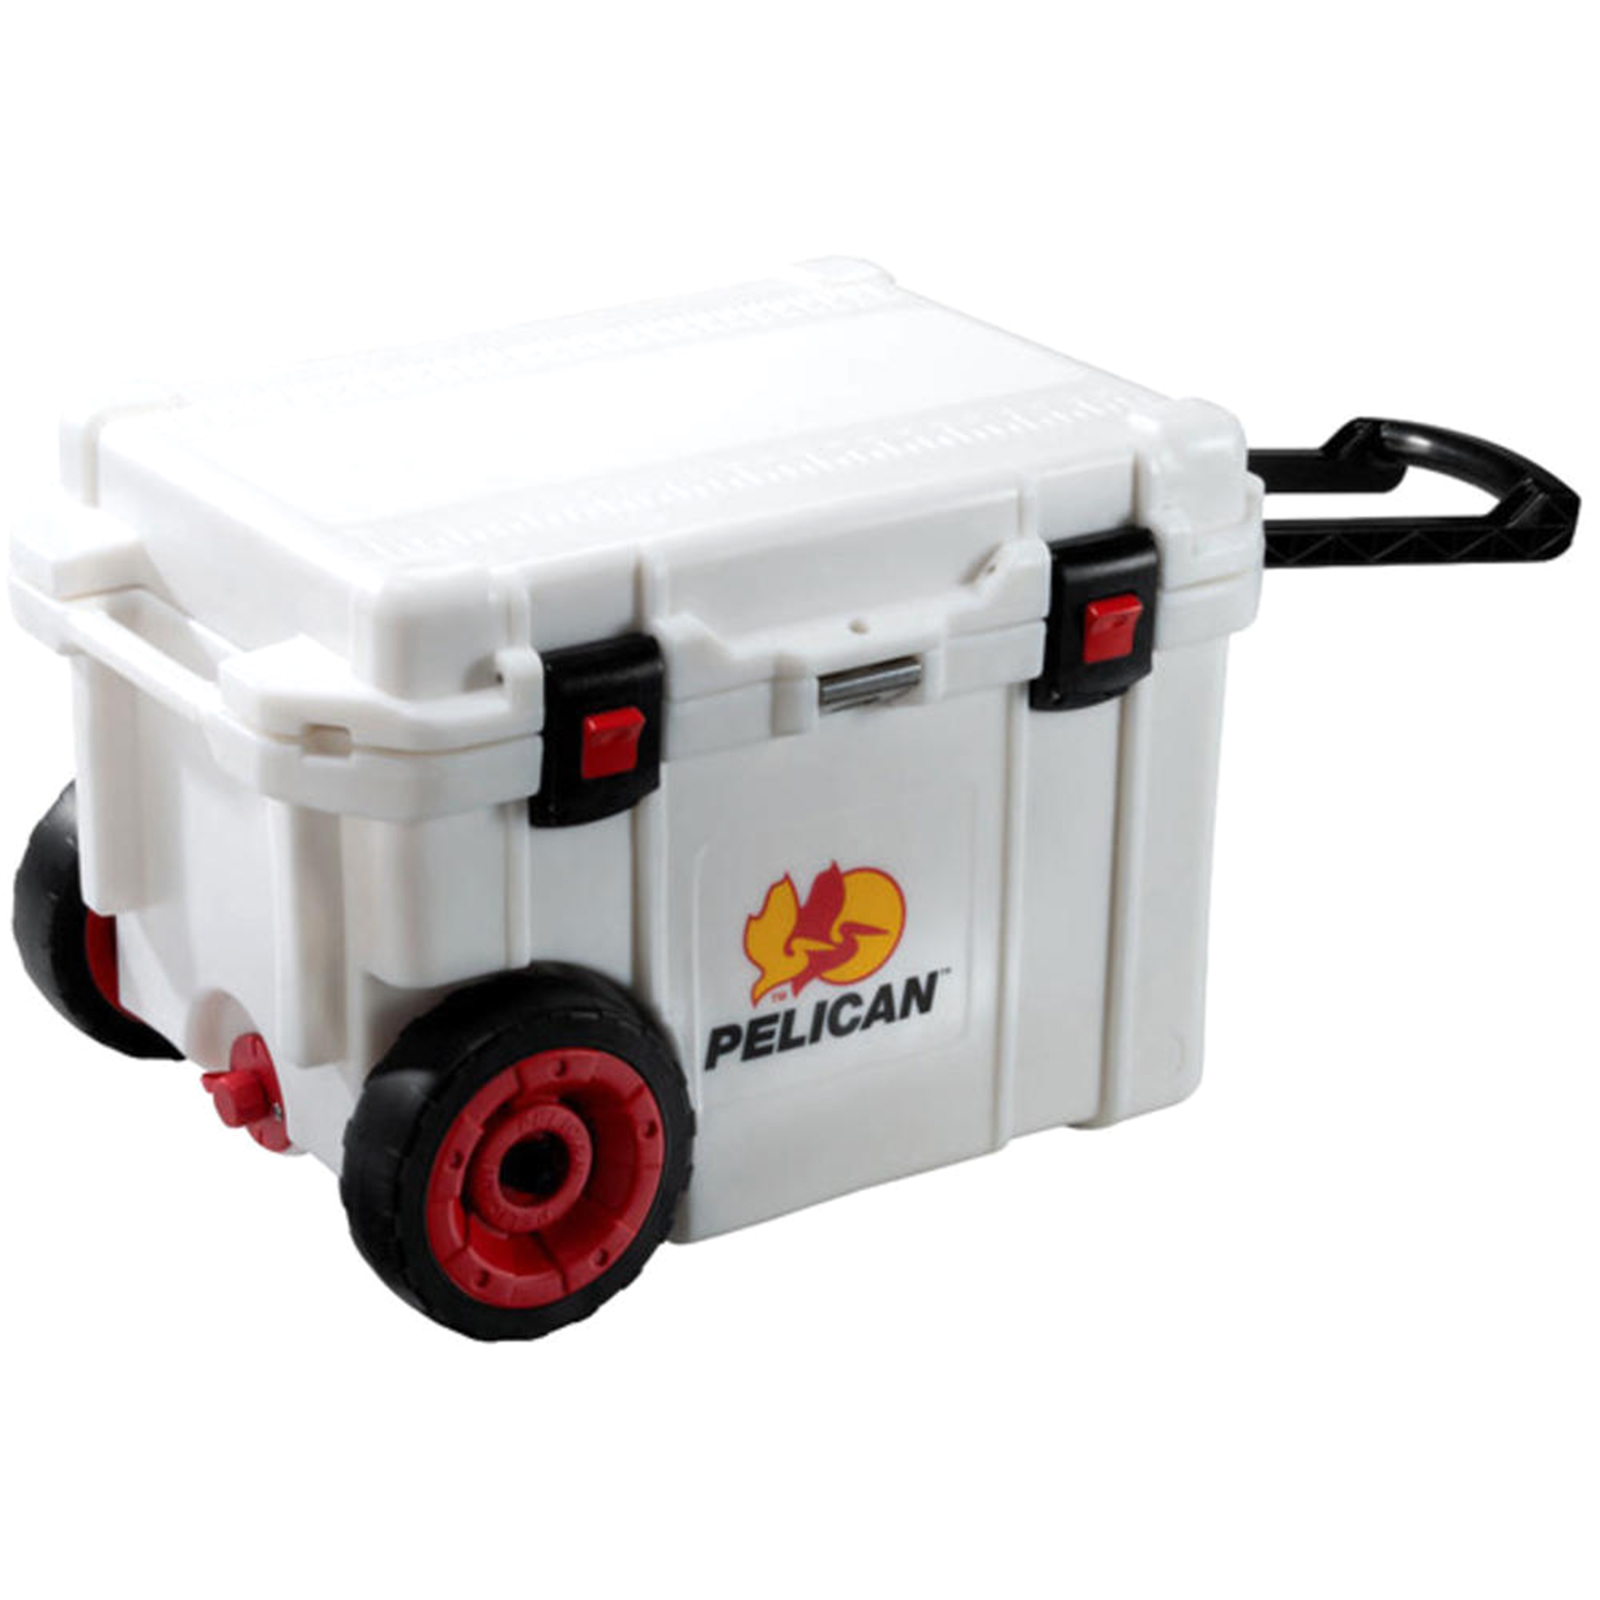 PELICAN PRODUCTS 45qt. Wheeled Cooler - White